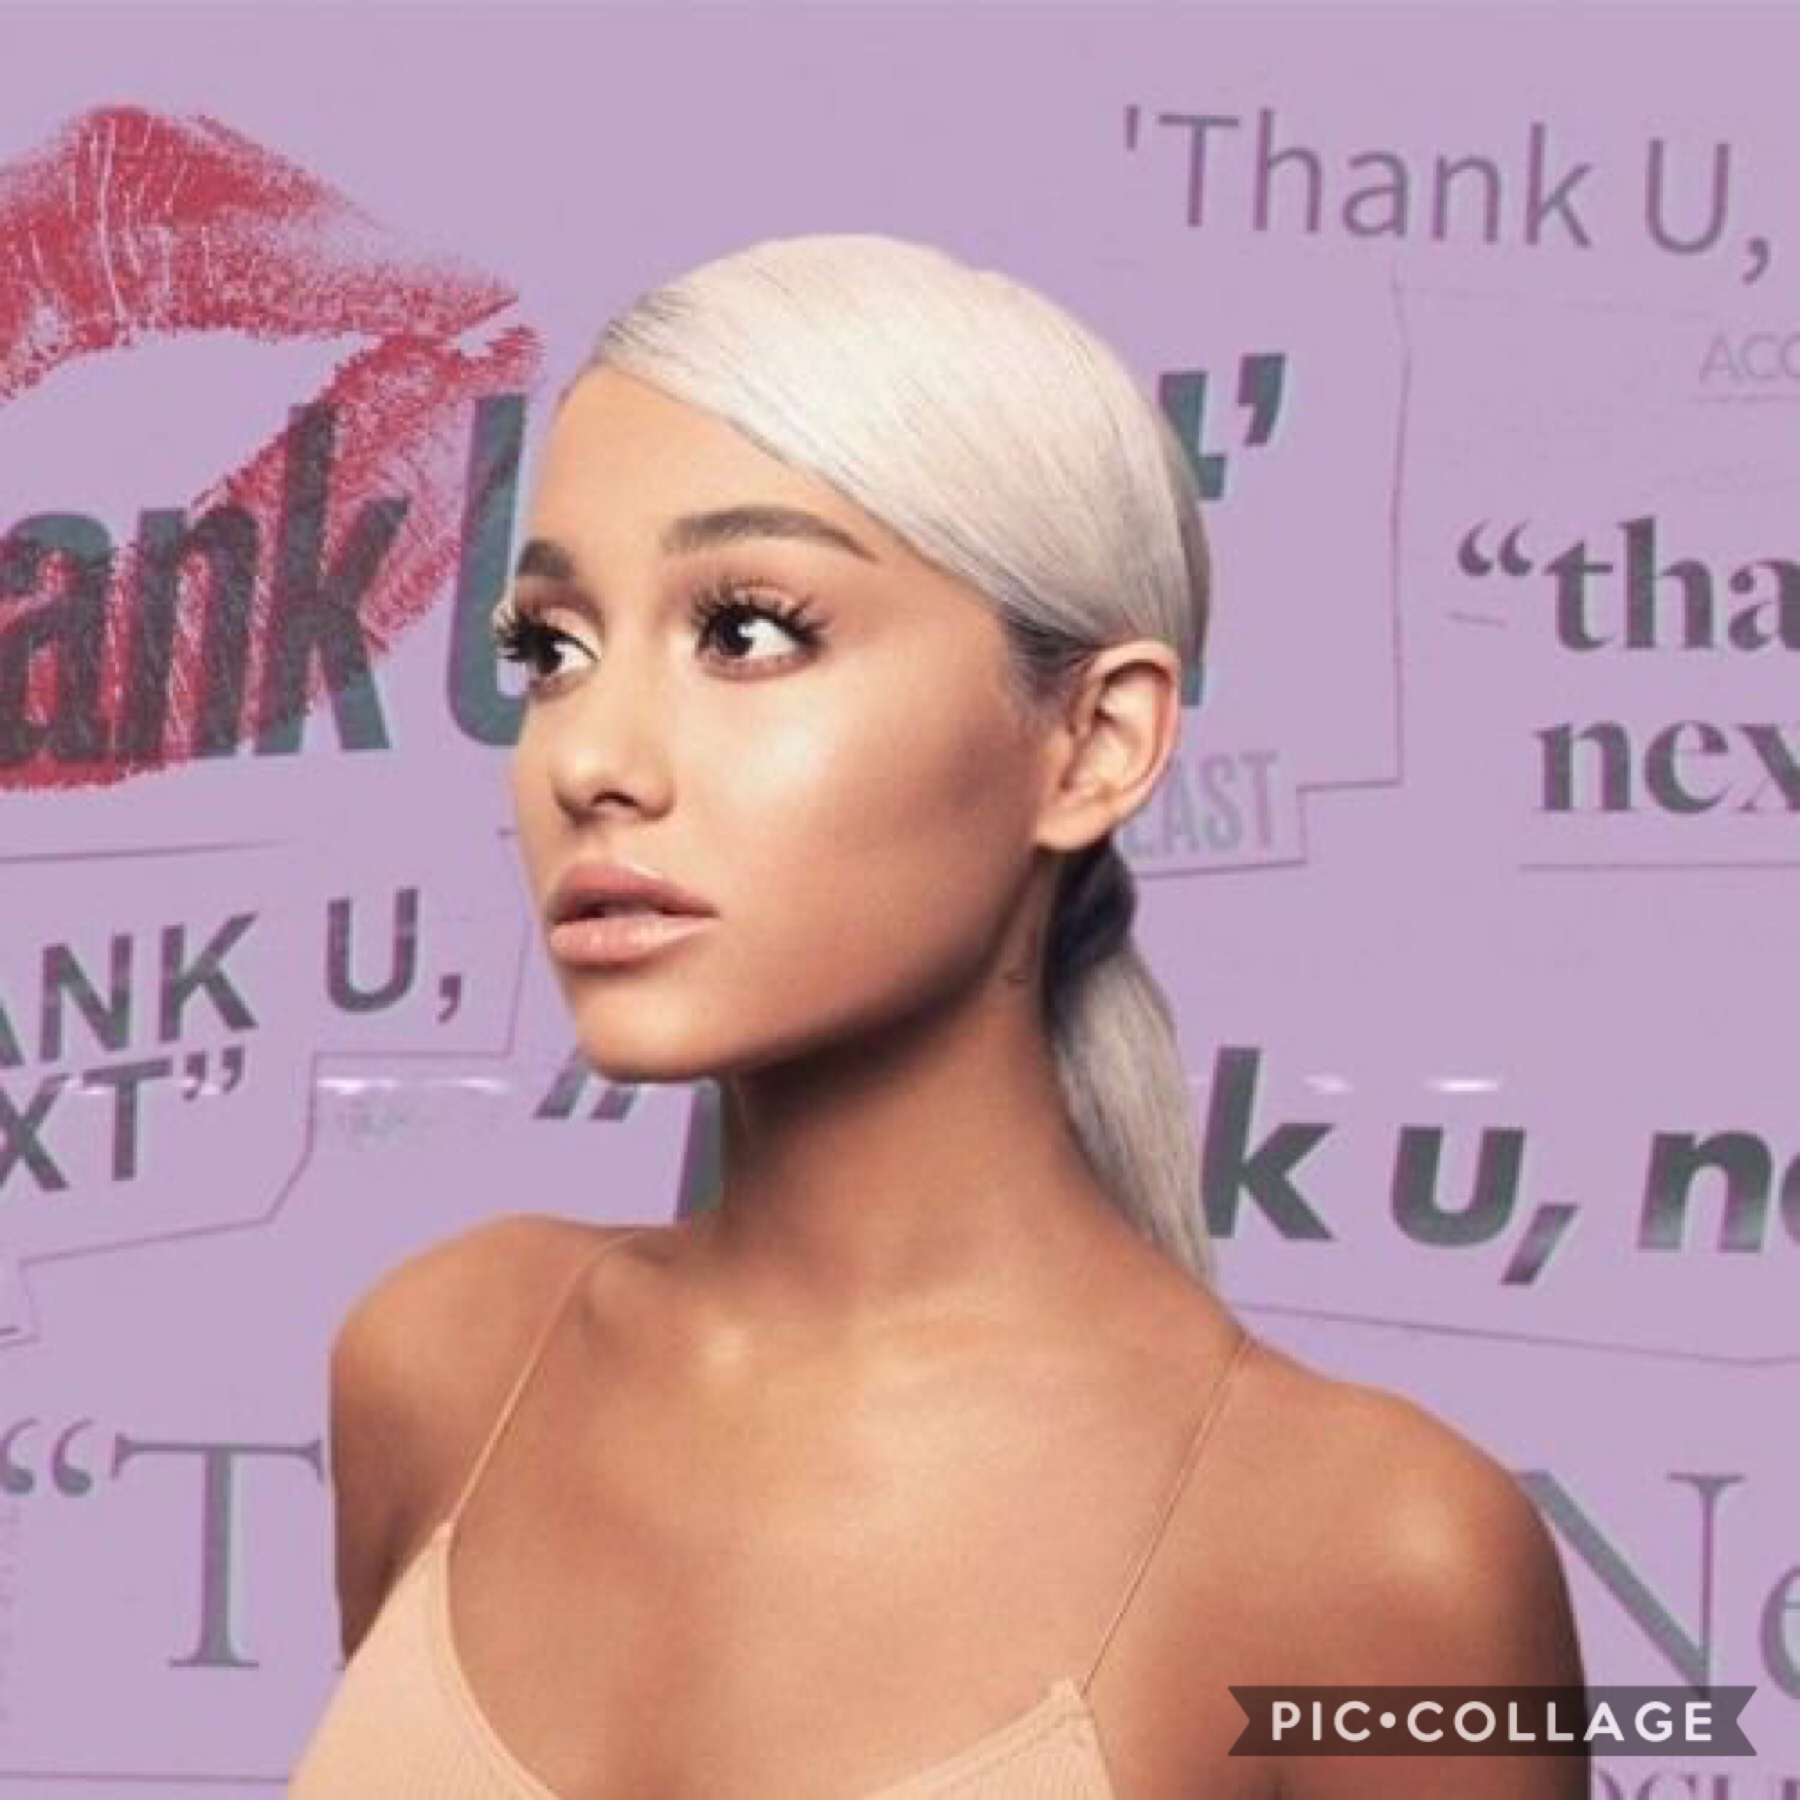 Thank you ari for being an inspiration to so many young woman. #ThankUNext ❣️❣️❣️